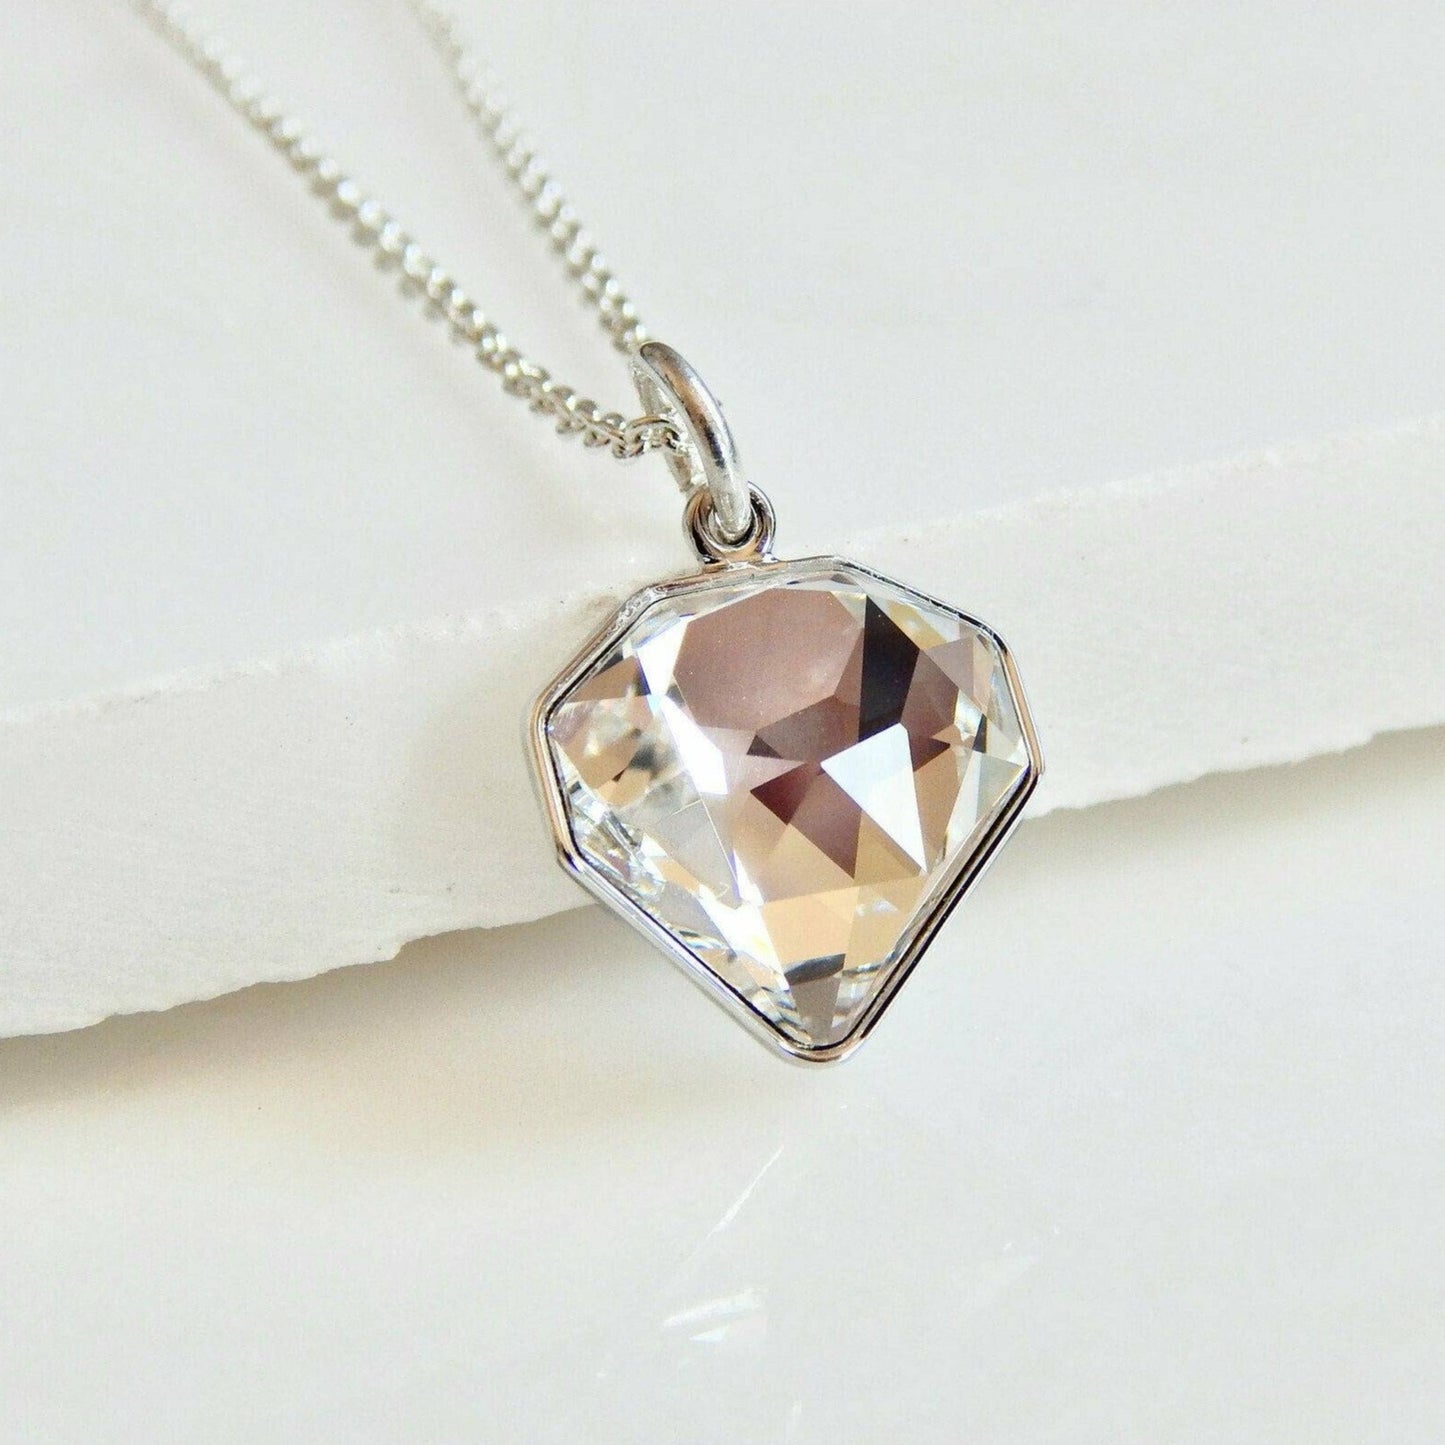 Crystal bling diamond necklace